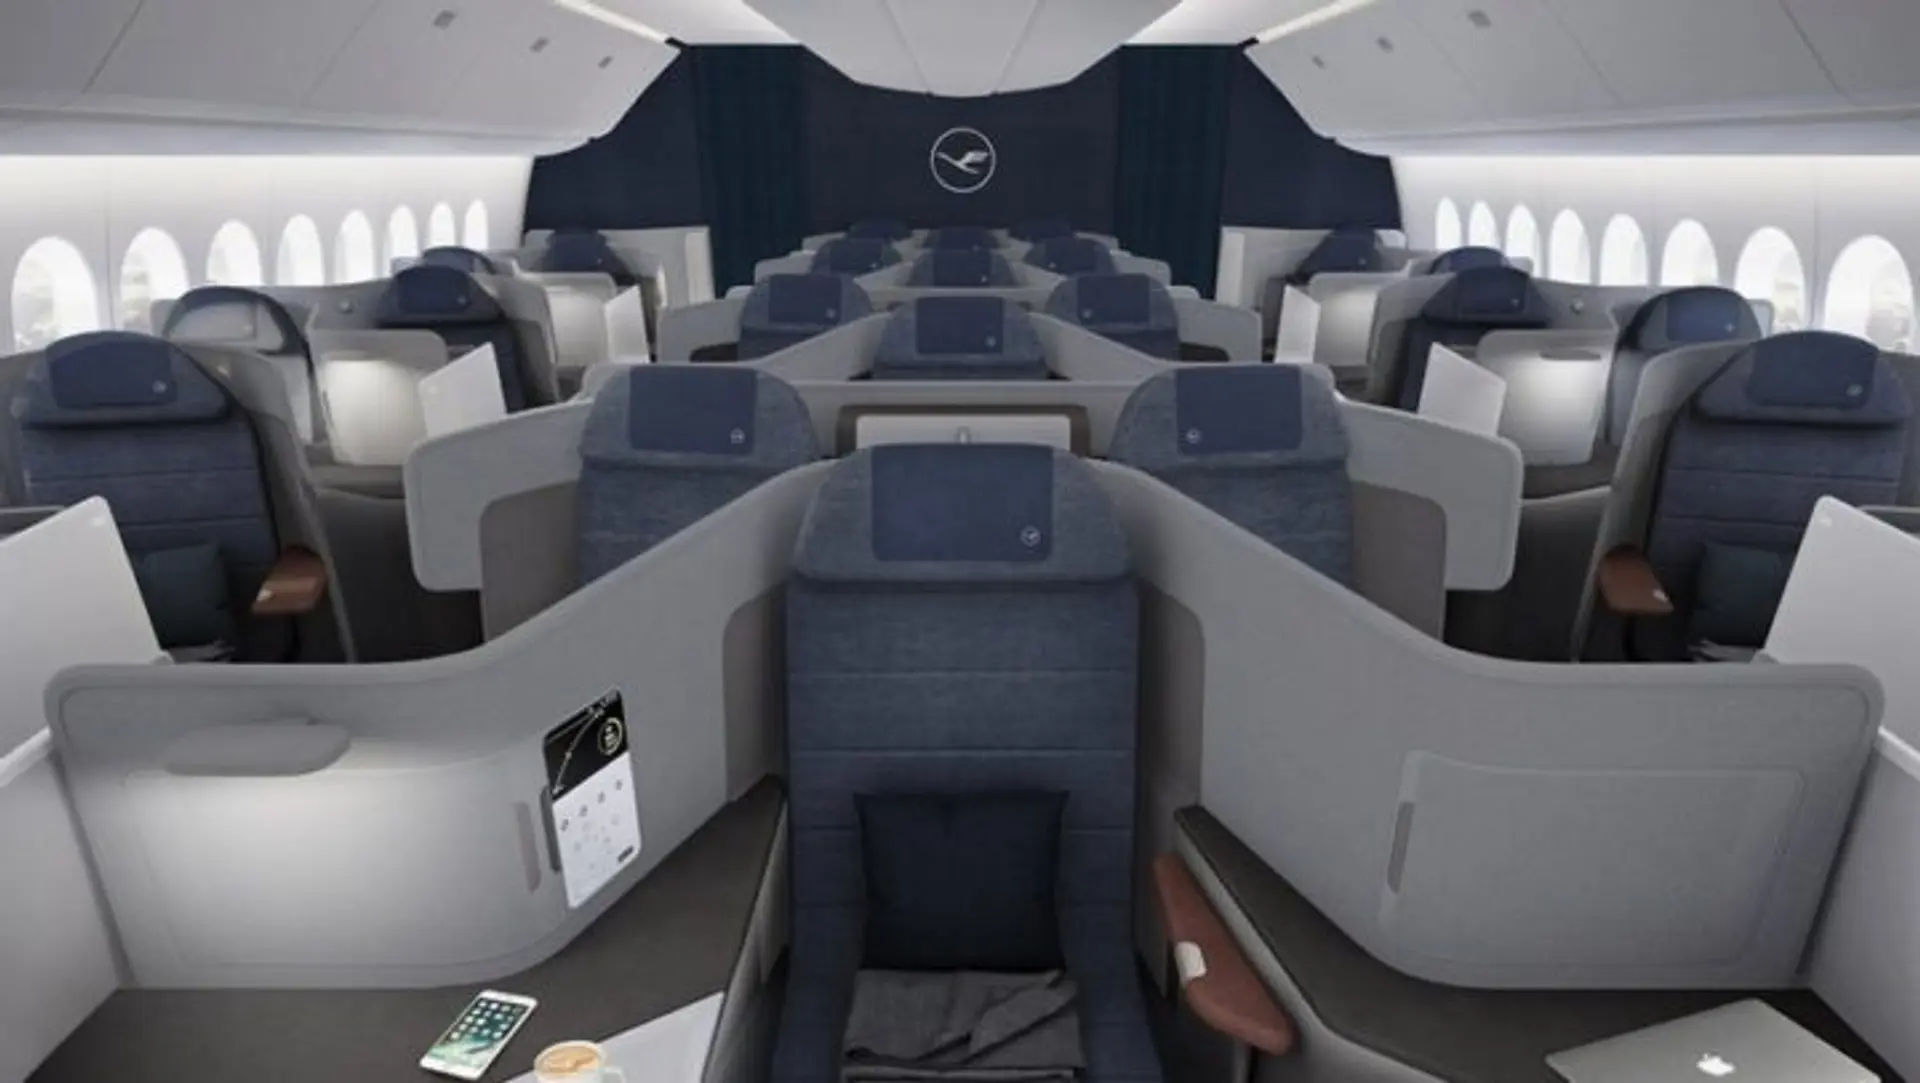 Airlines News - The Boeing B777X sets an entirely new standard